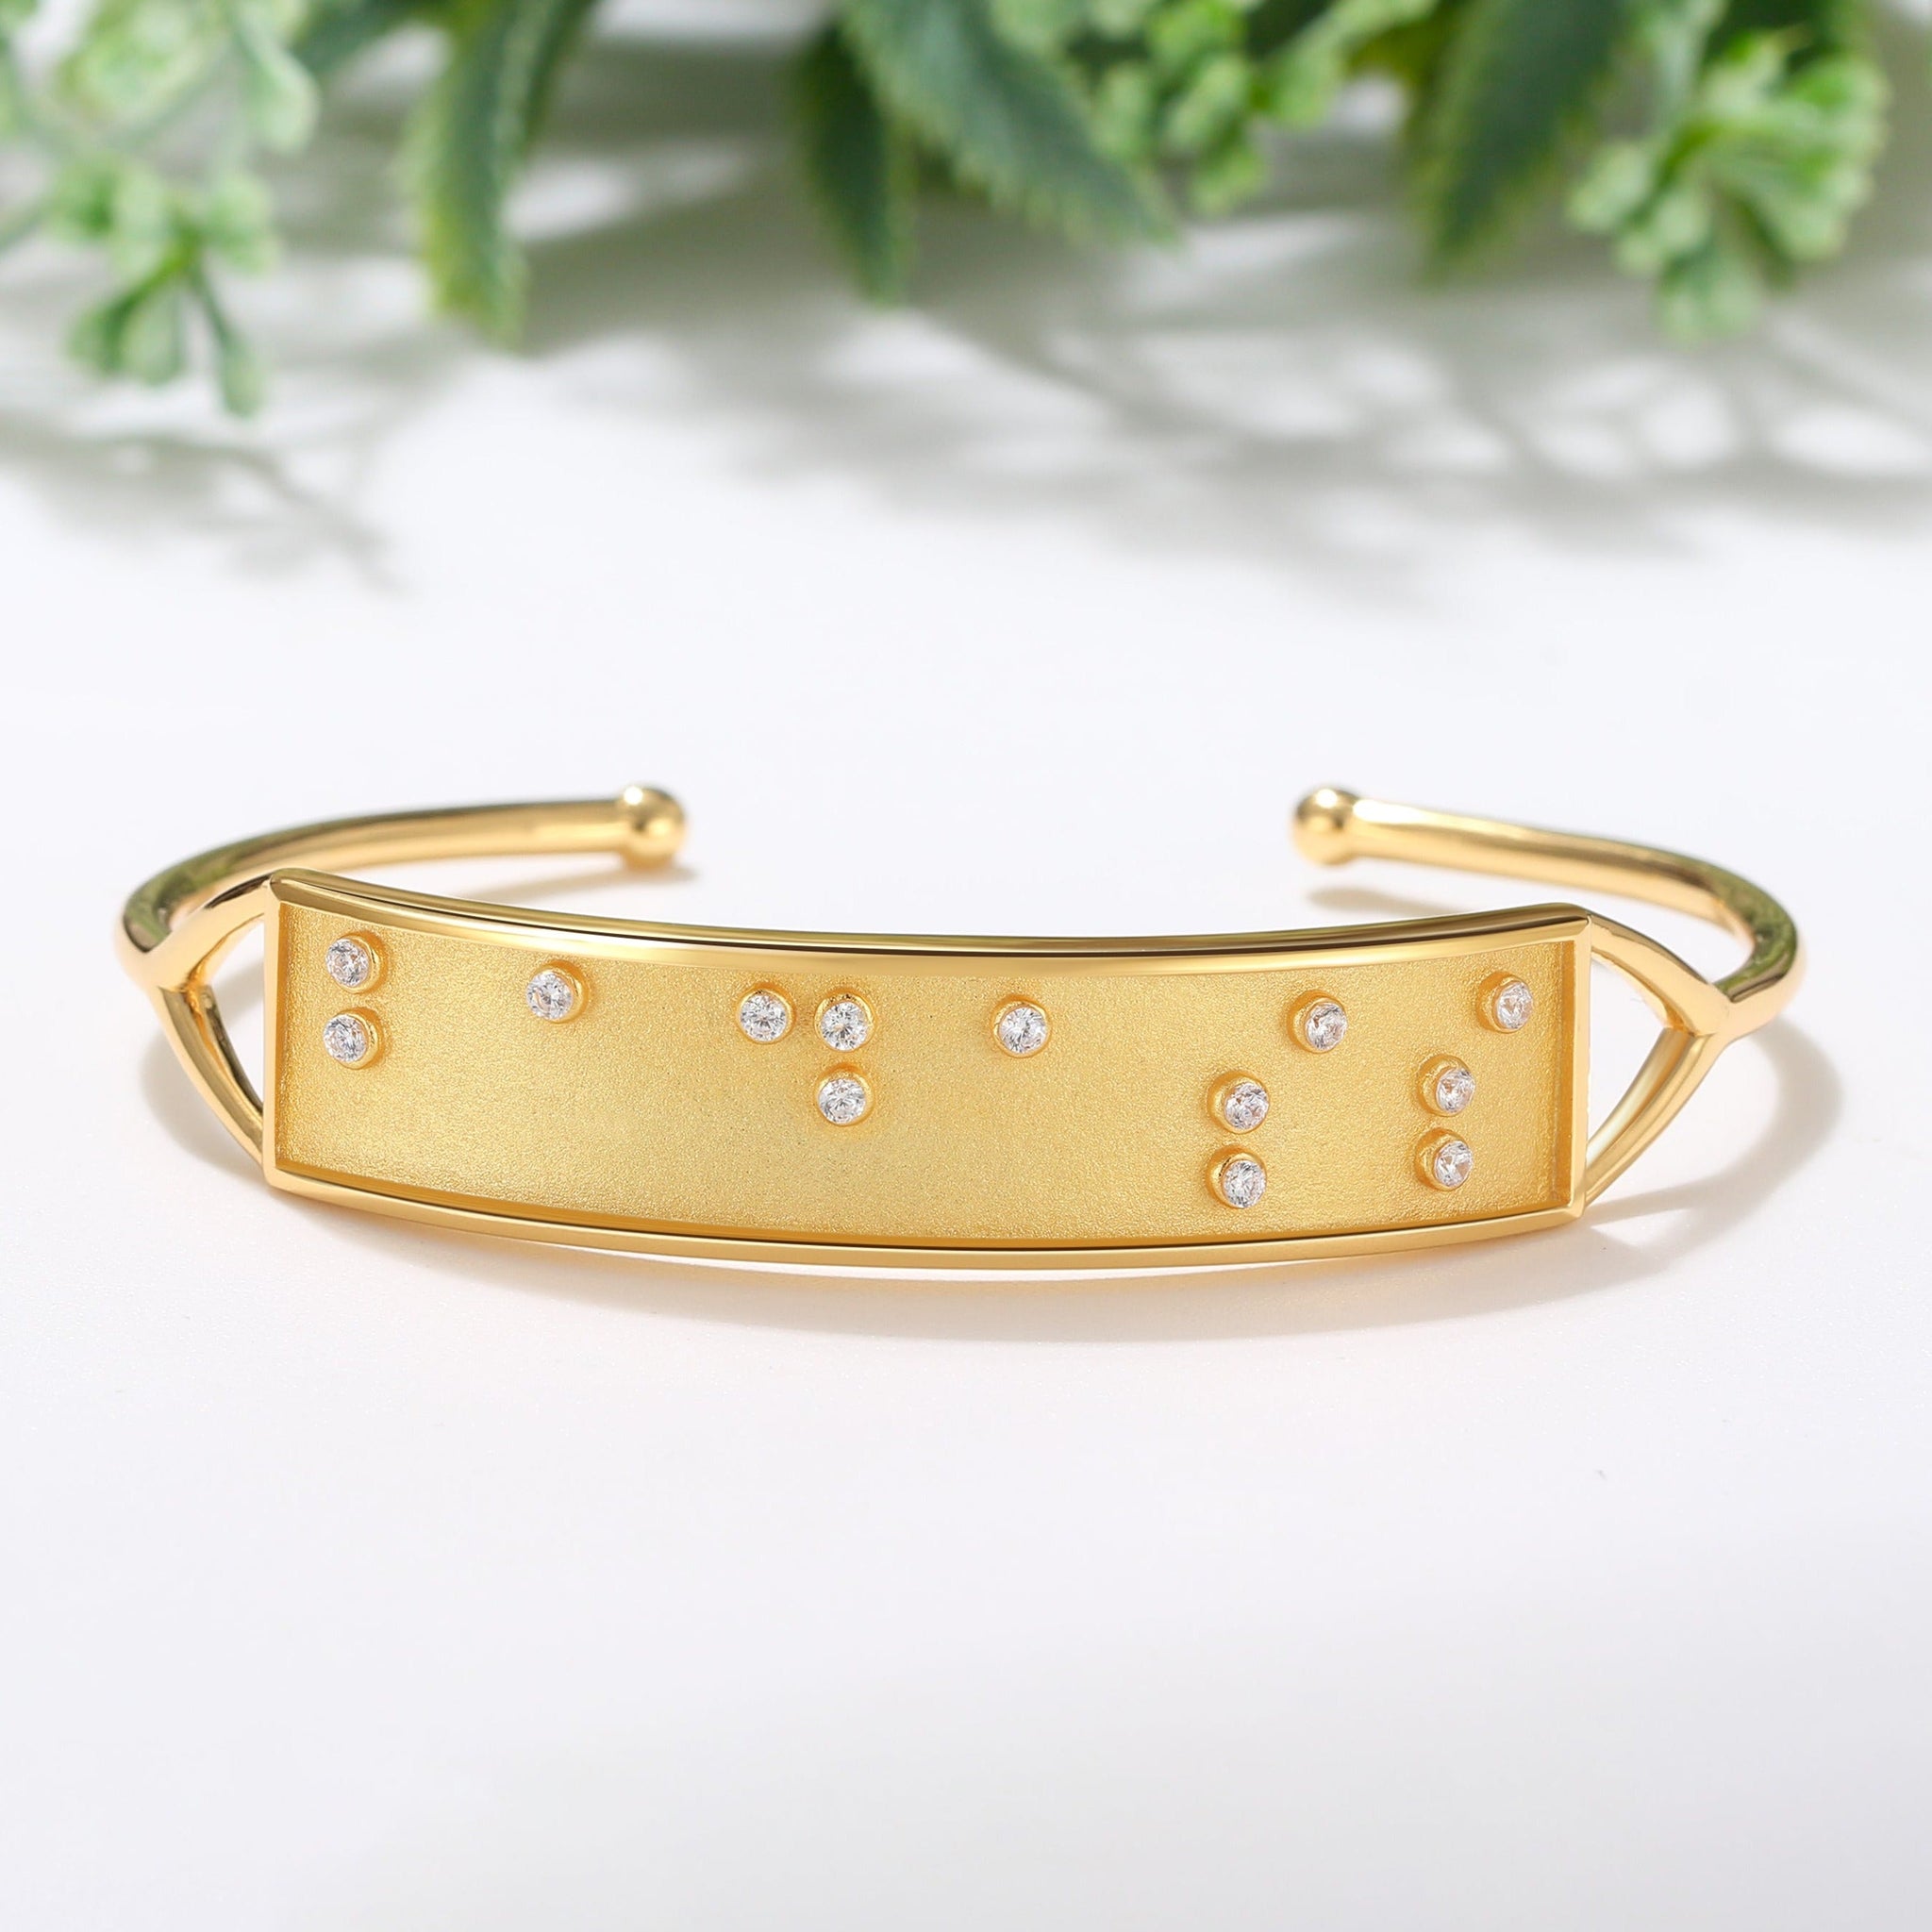 Braille Inspired Cuff Bracelet | Touchstone Collection by Everwild -  Sheridanboutique